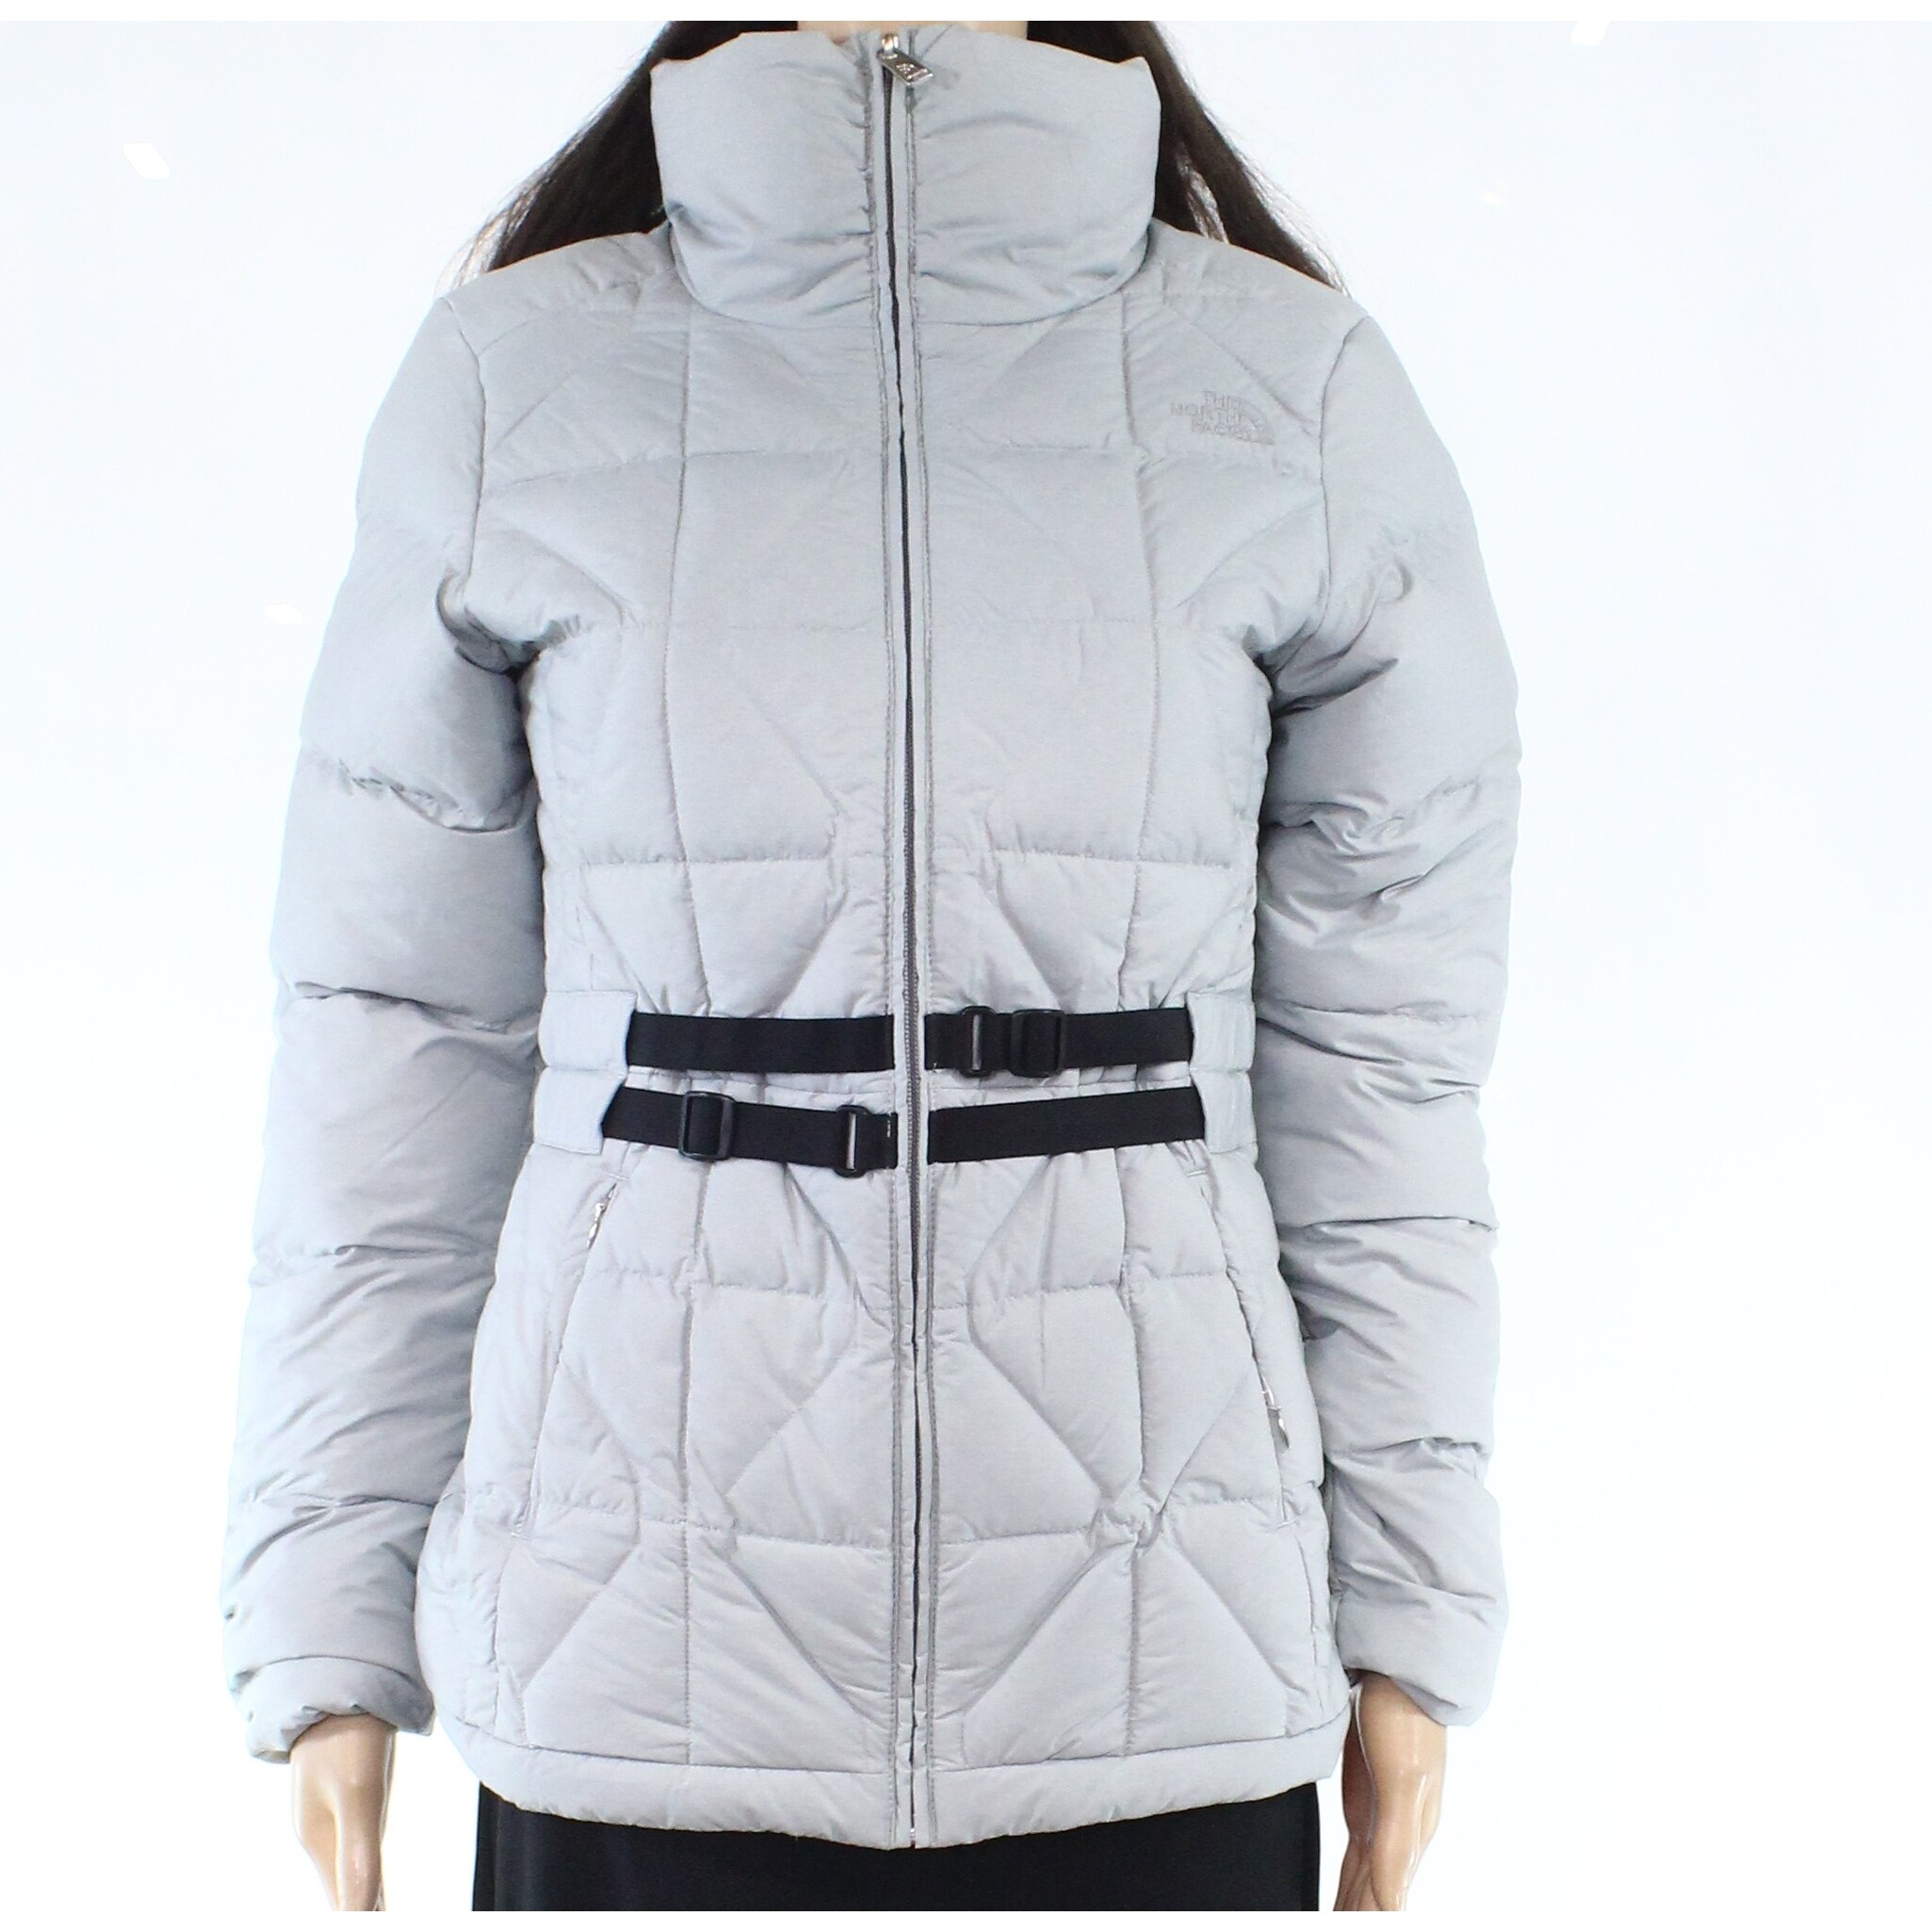 the north face women's puffer